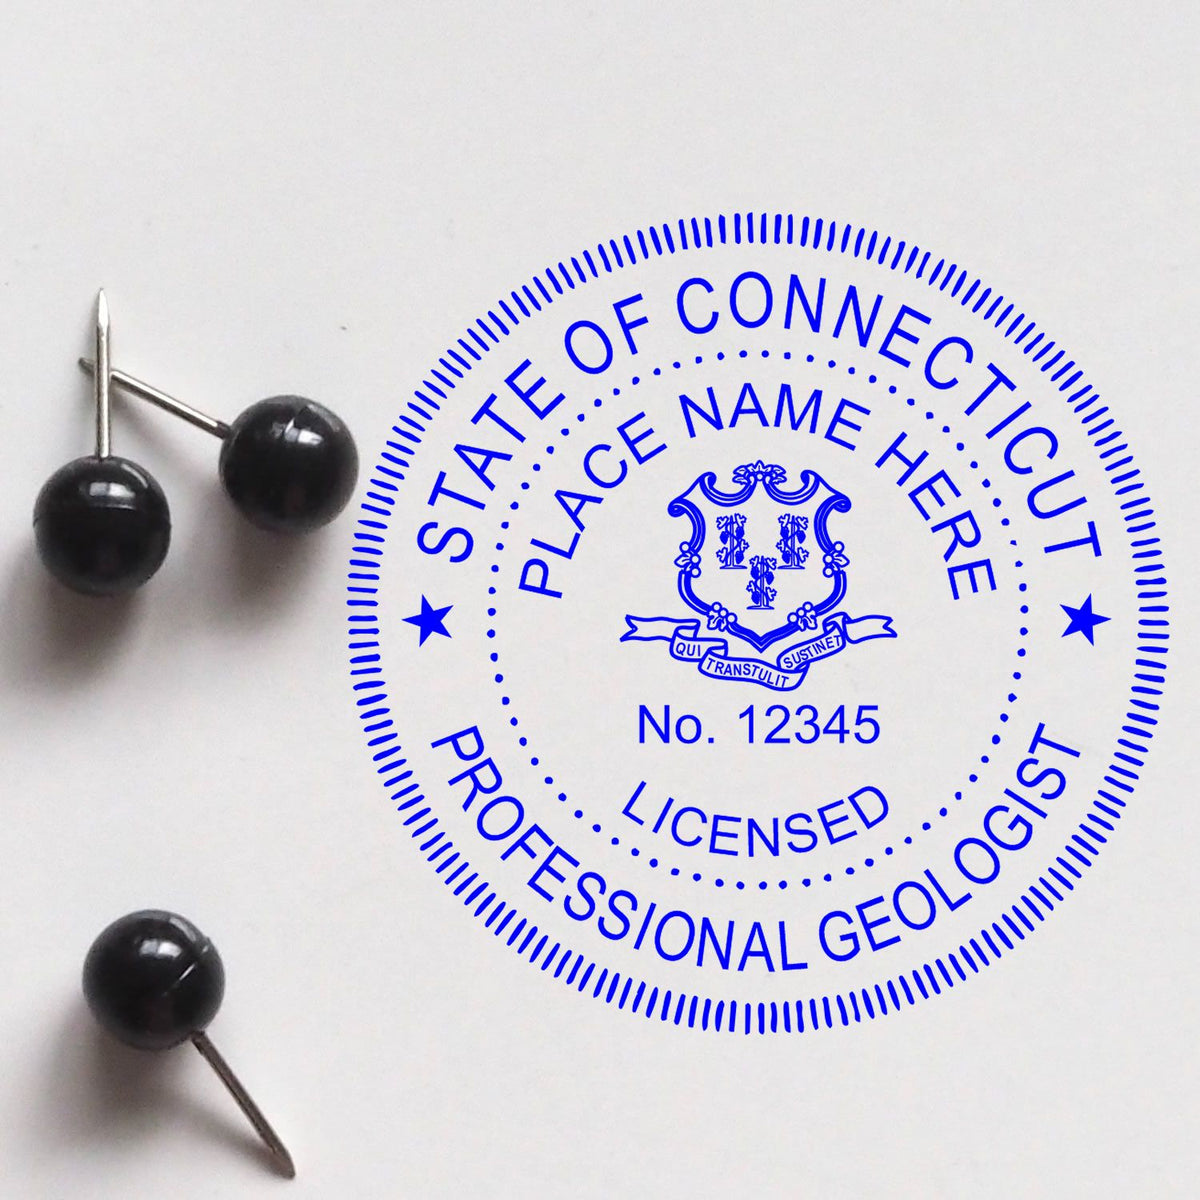 A lifestyle photo showing a stamped image of the Digital Connecticut Geologist Stamp, Electronic Seal for Connecticut Geologist on a piece of paper